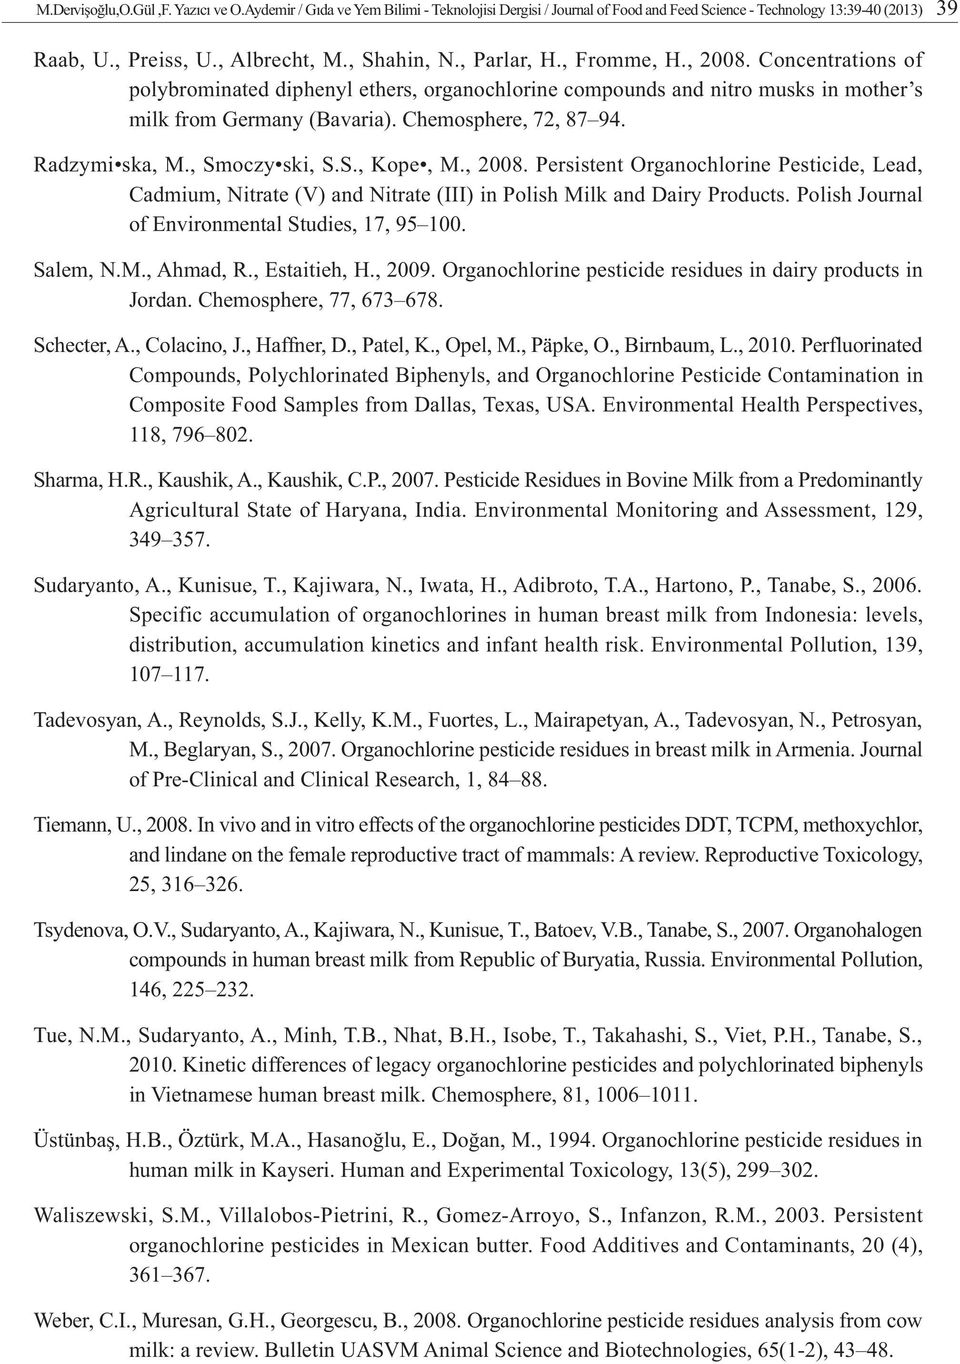 Radzymi ska, M., Smoczy ski, S.S., Kope, M., 2008. Persistent Organochlorine Pesticide, Lead, Cadmium, Nitrate (V) and Nitrate (III) in Polish Milk and Dairy Products.